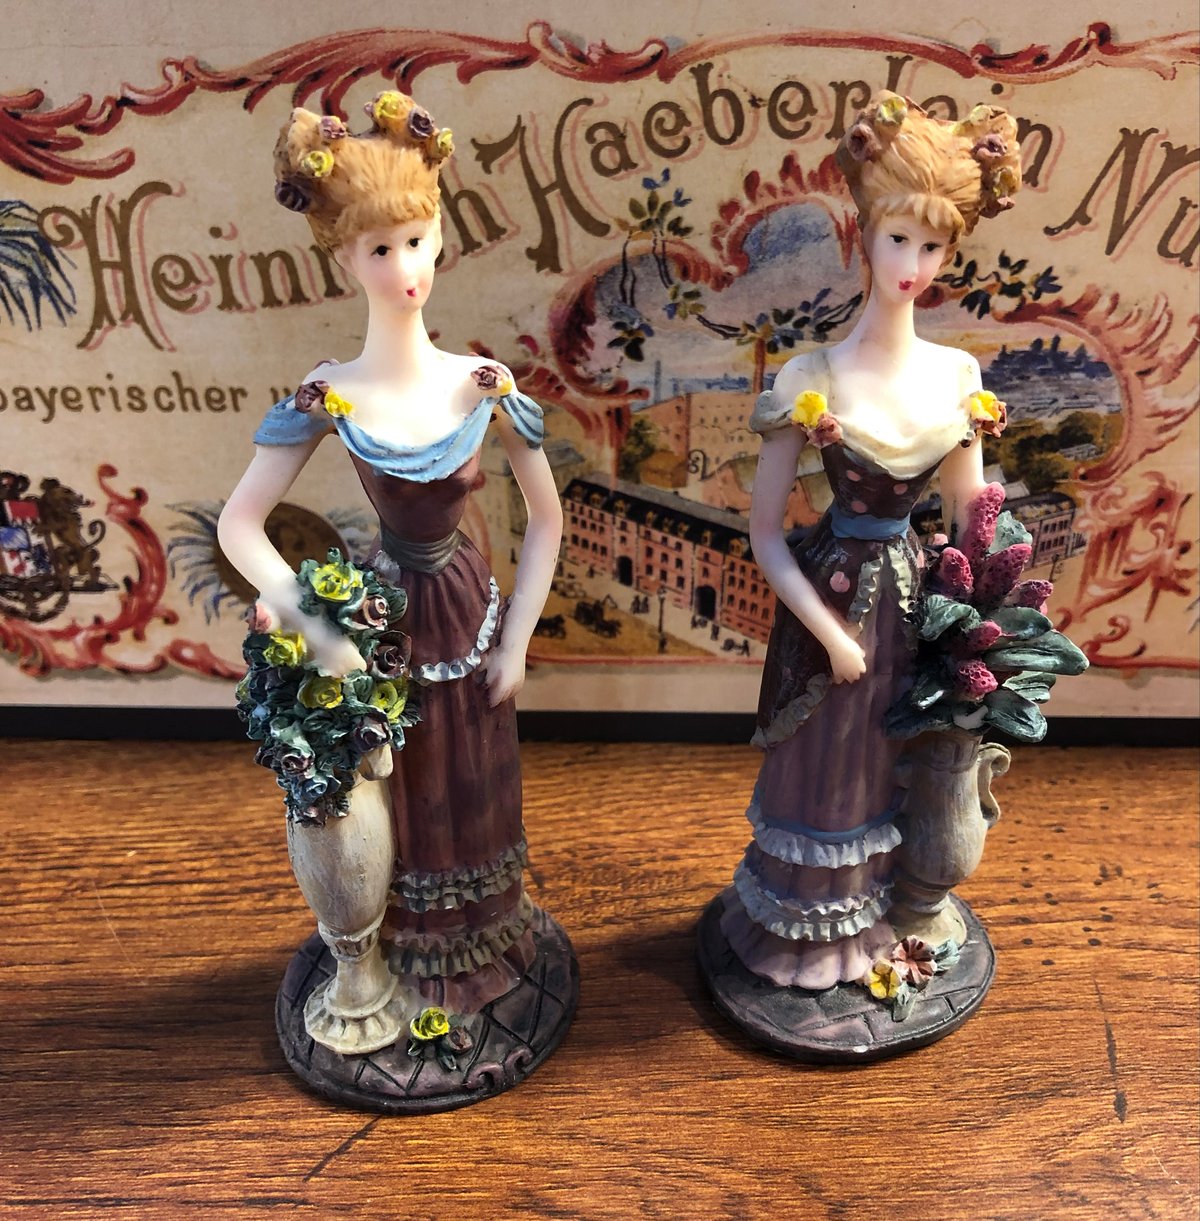 Image of Victorian Lady figurines